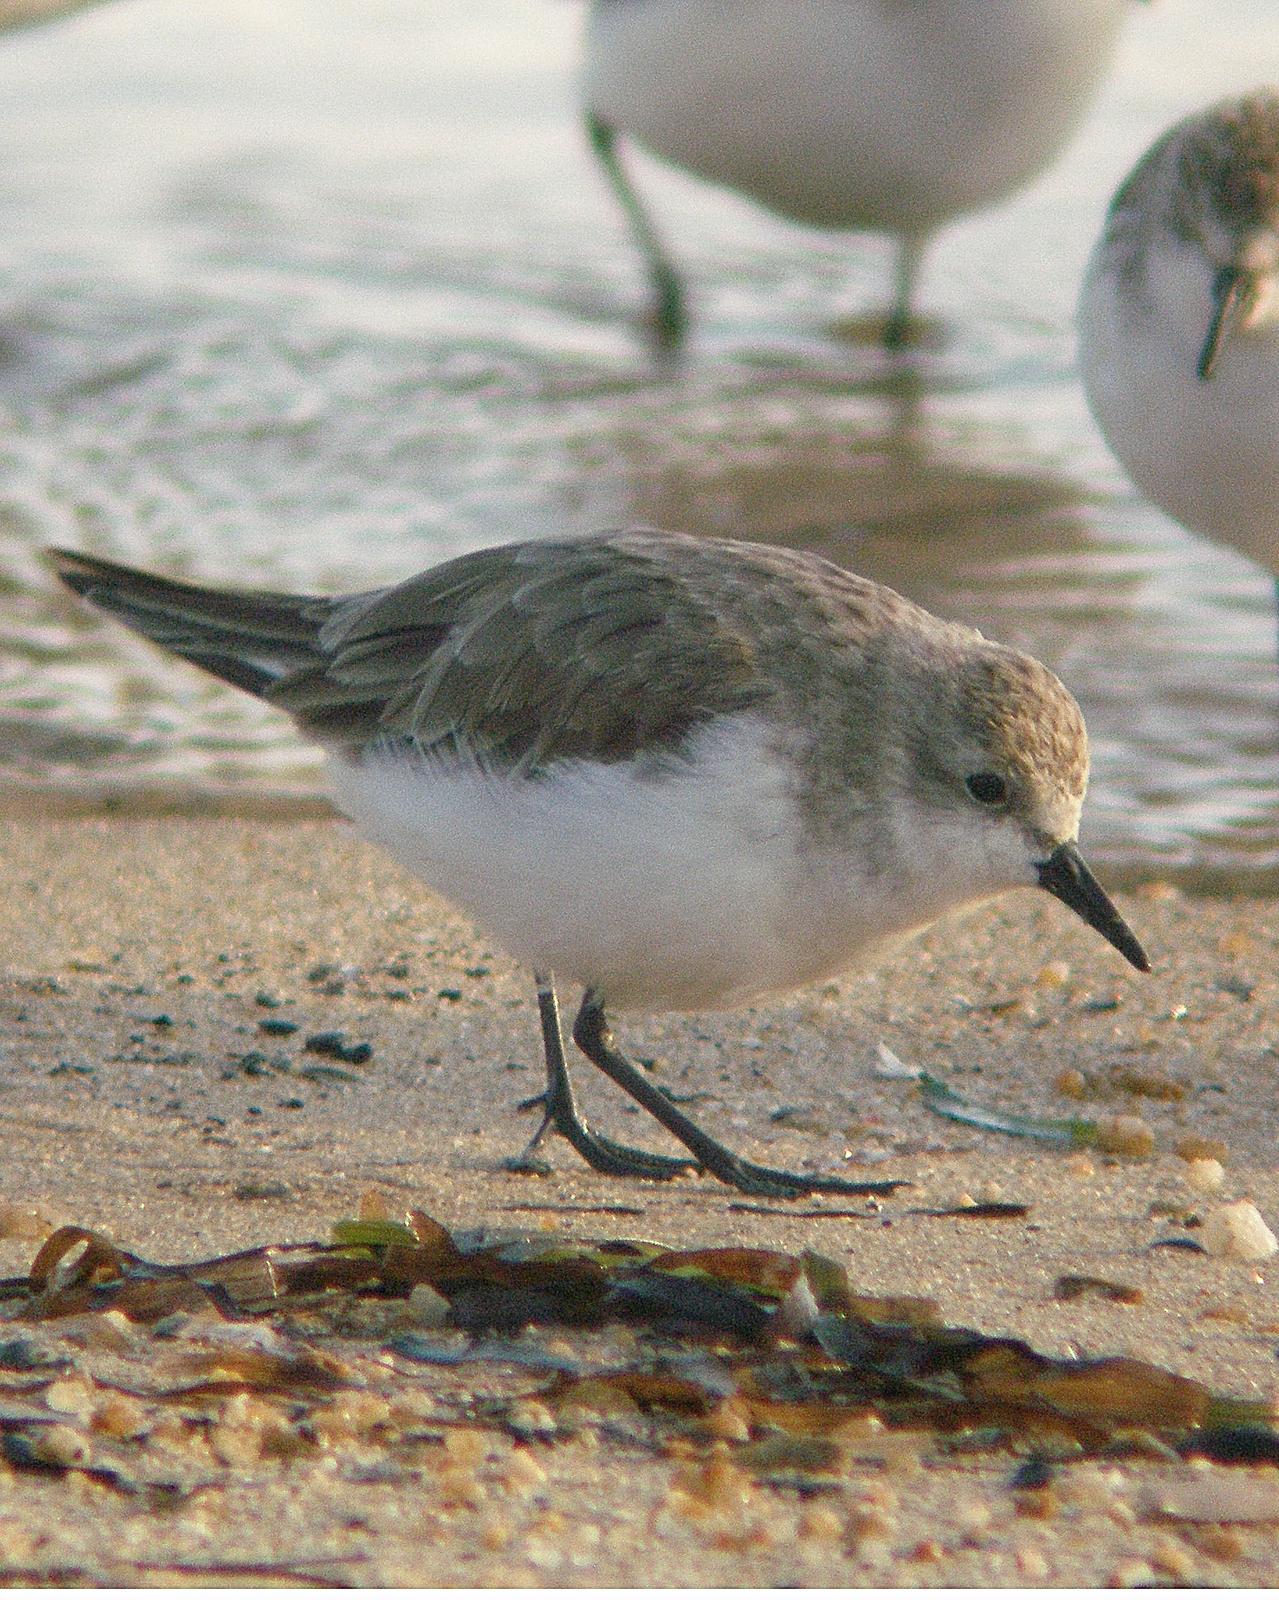 Red-necked Stint Photo by Steve Percival